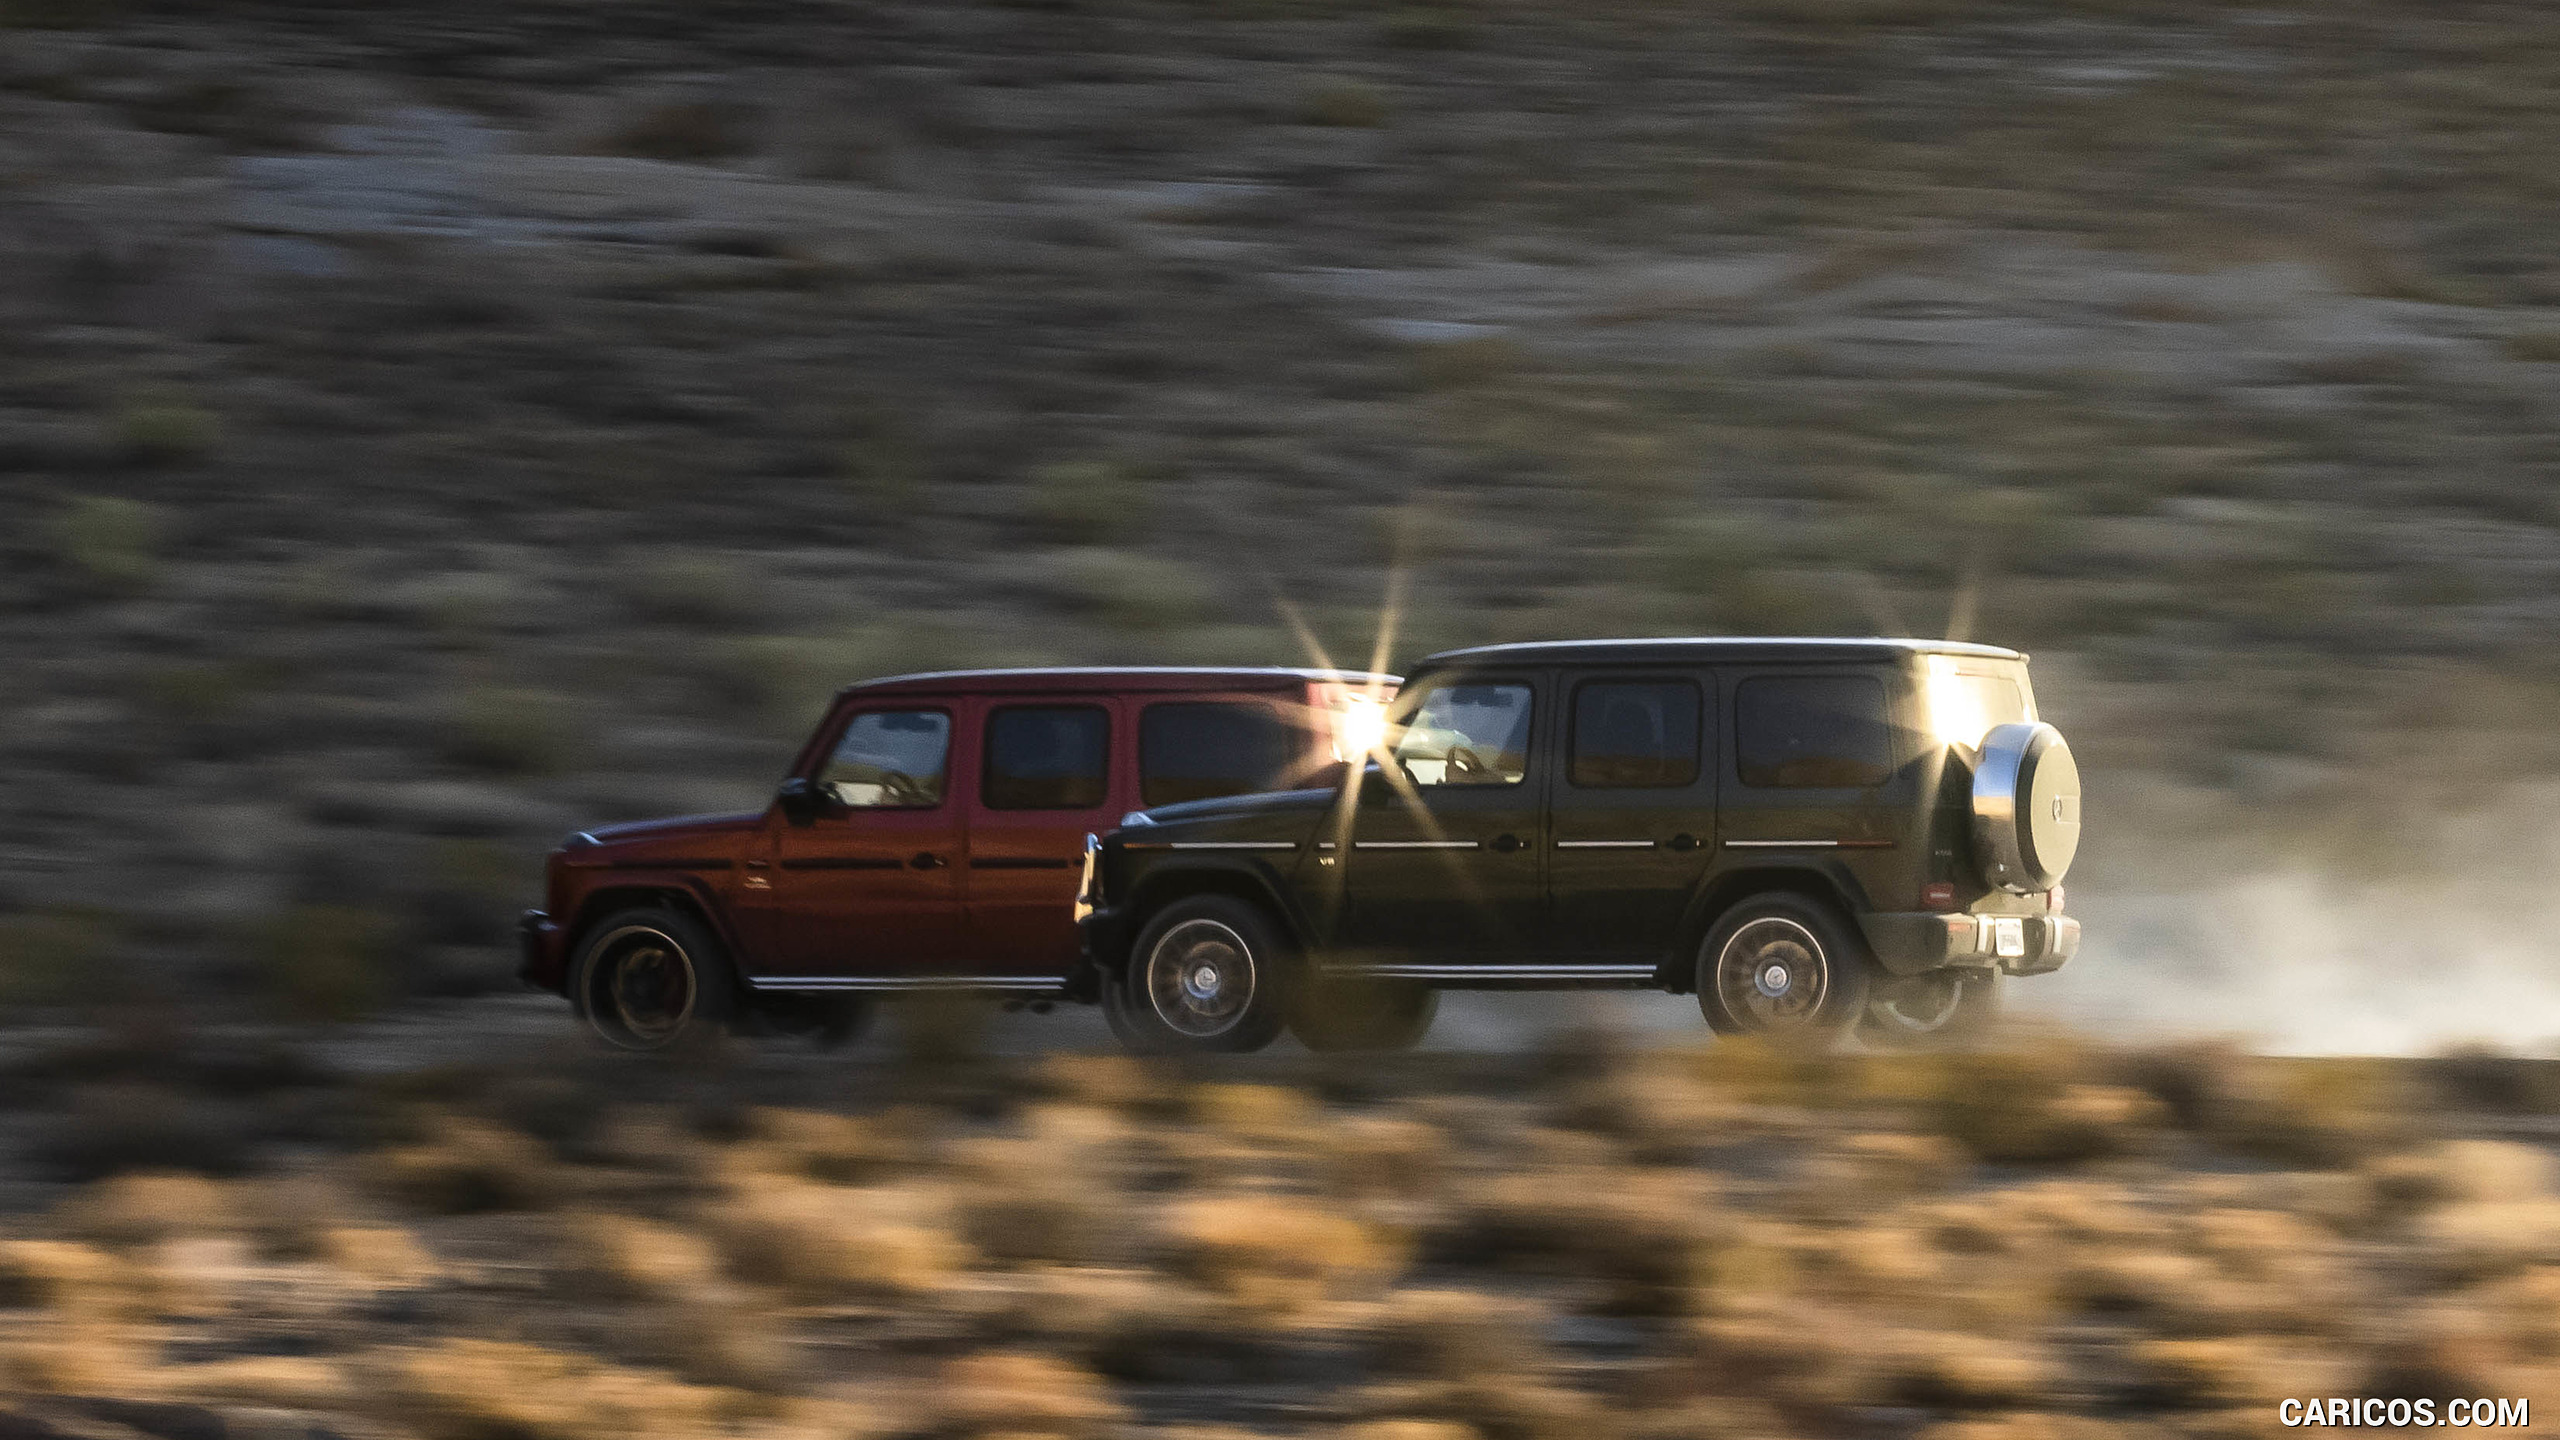 2019 Mercedes-Benz G550 G-Class (U.S.-Spec) and 2019 G63 AMG, #340 of 397